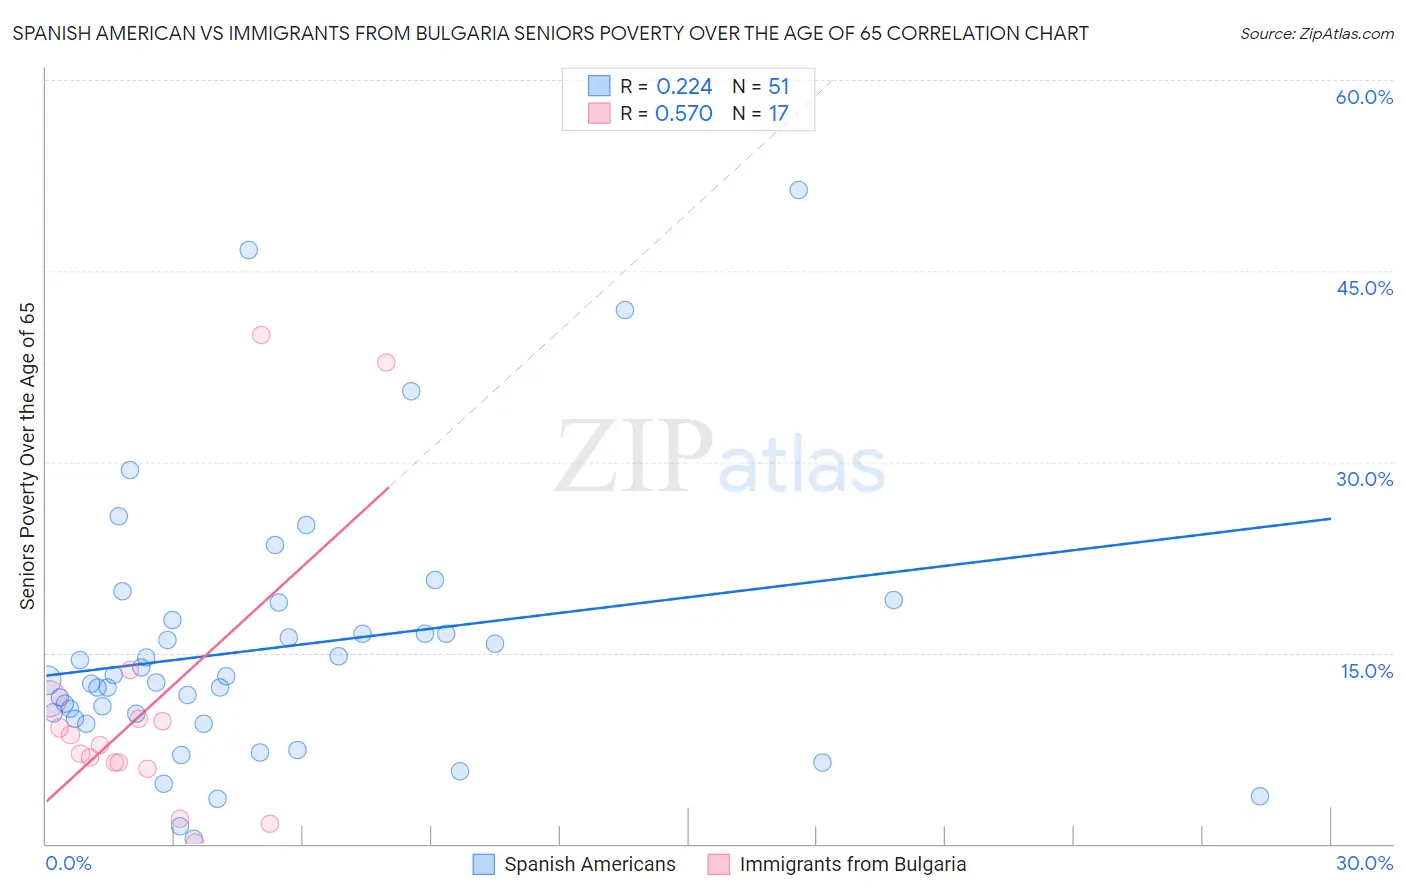 Spanish American vs Immigrants from Bulgaria Seniors Poverty Over the Age of 65